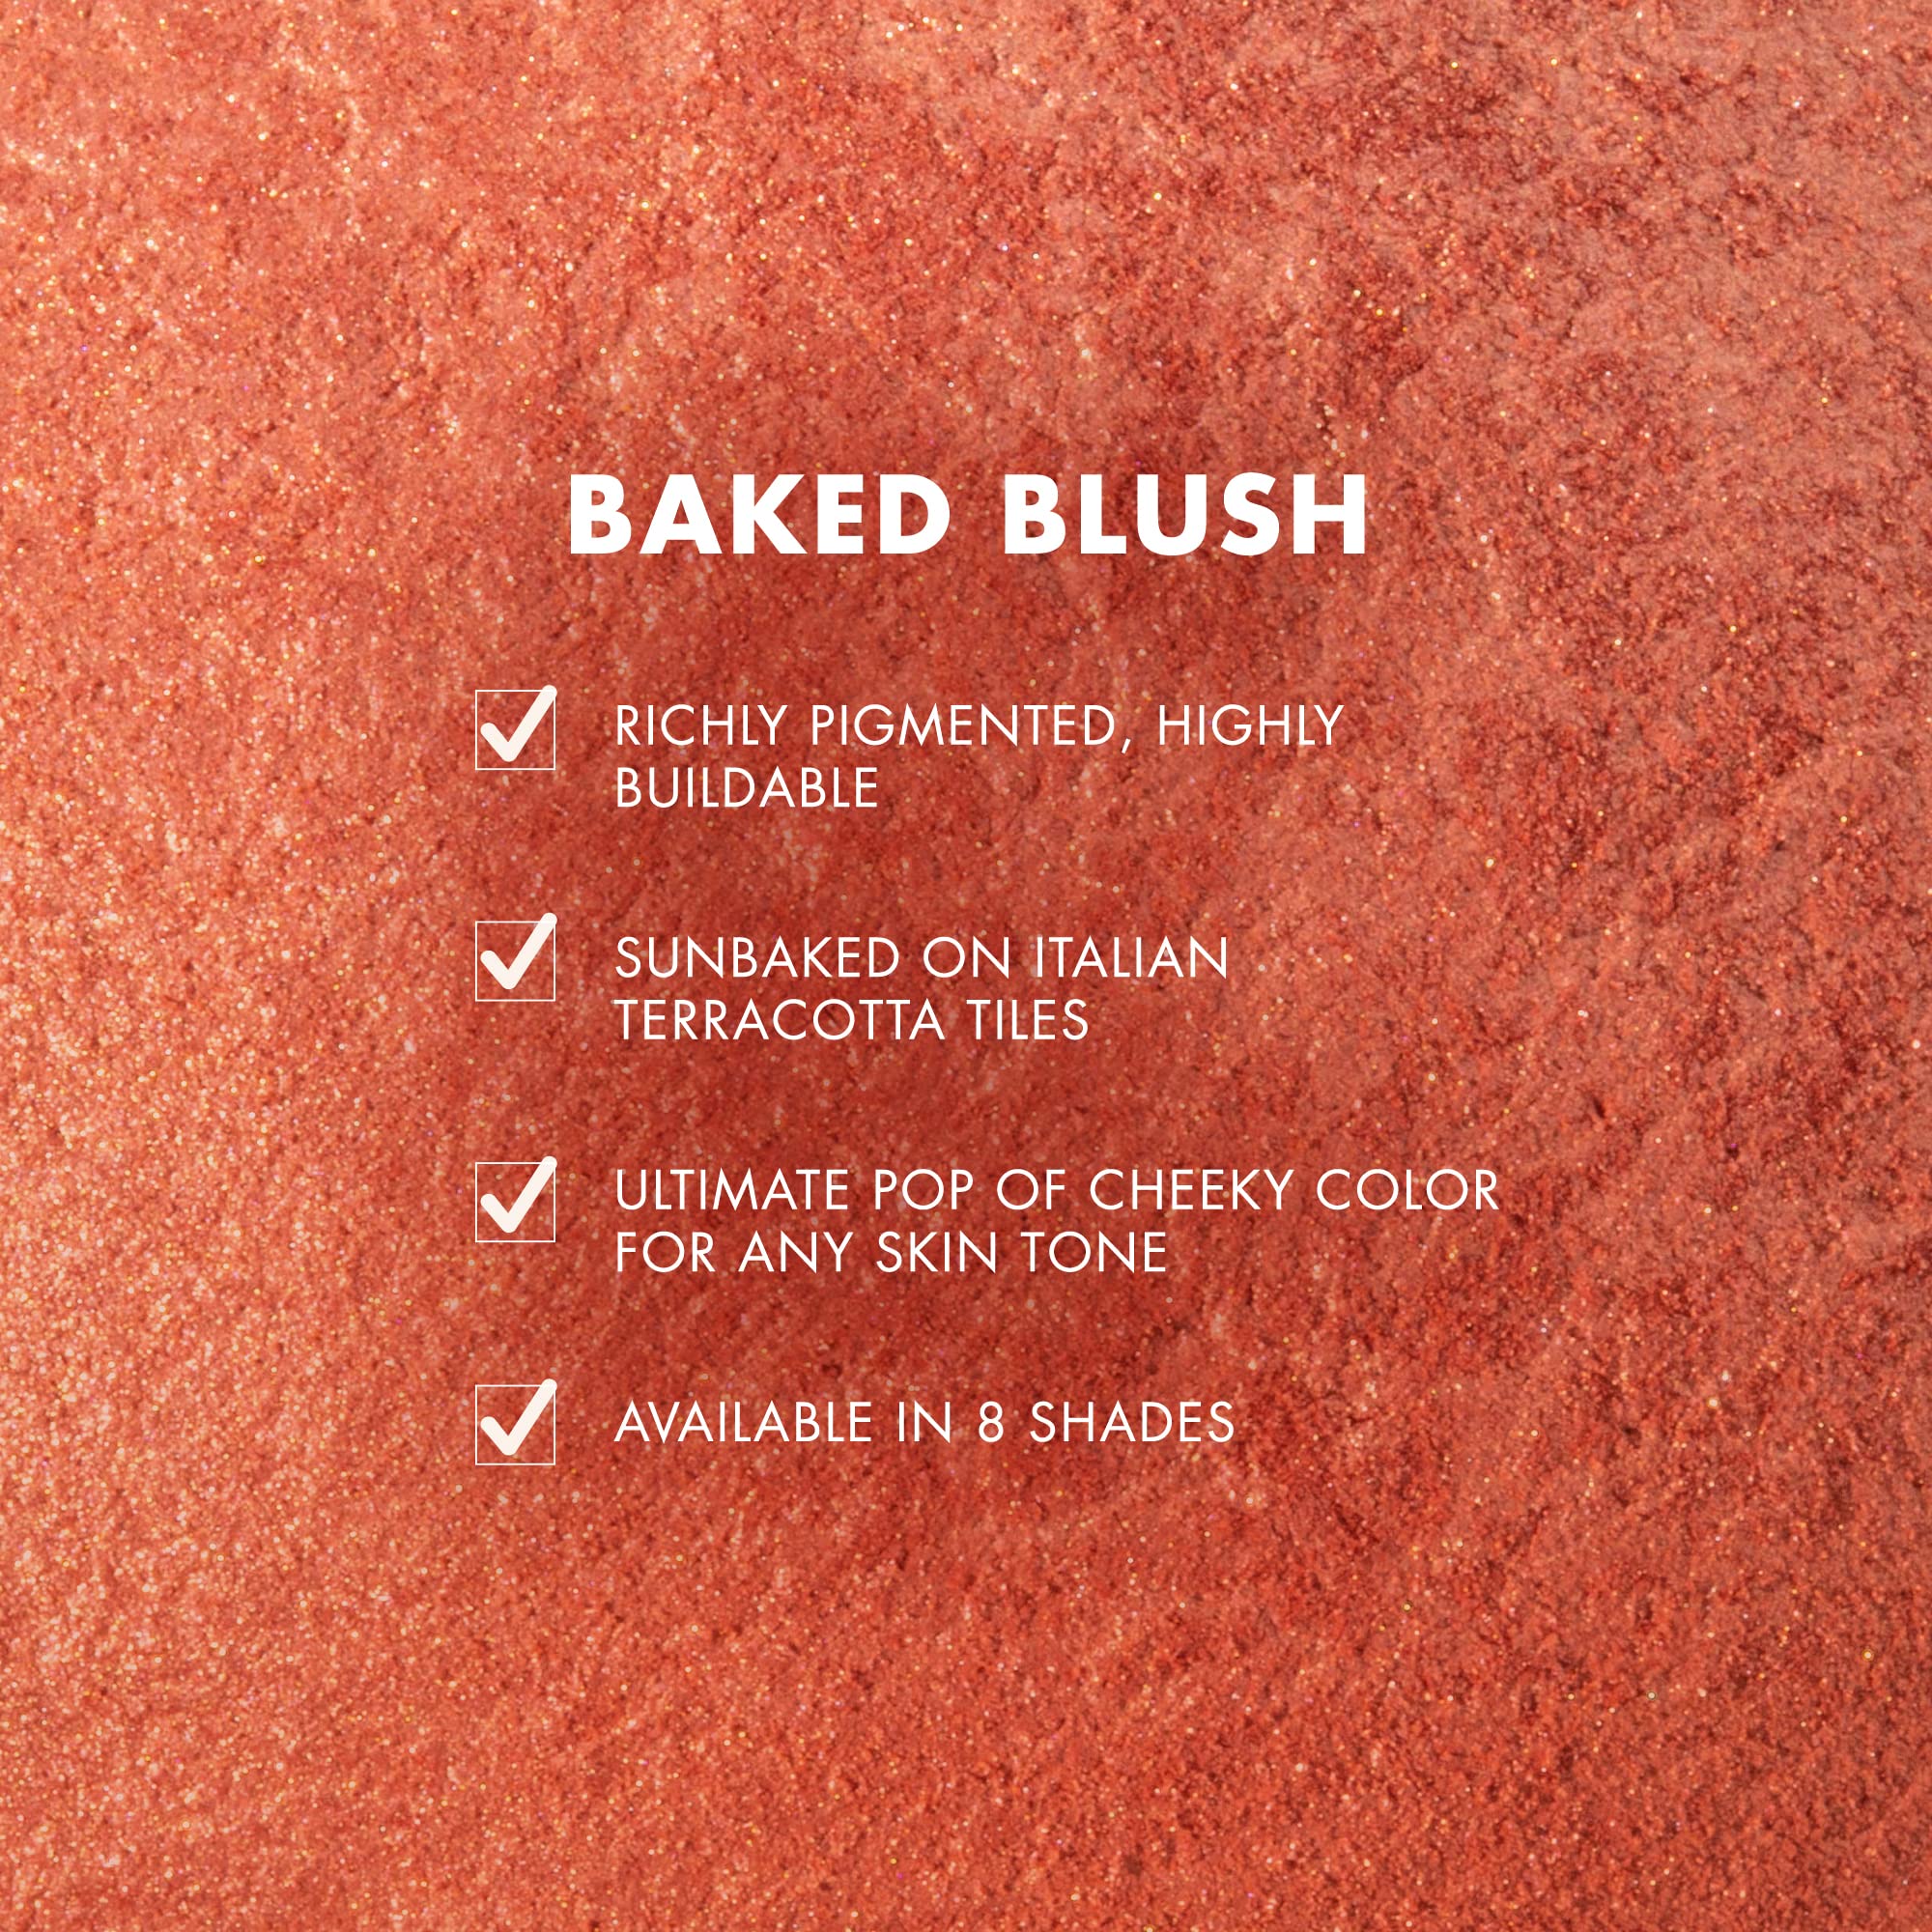 Milani Baked Blush - Berry Amore (0.12 Ounce) Cruelty-Free Powder Blush - Shape, Contour & Highlight Face for a Shimmery or Matte Finish